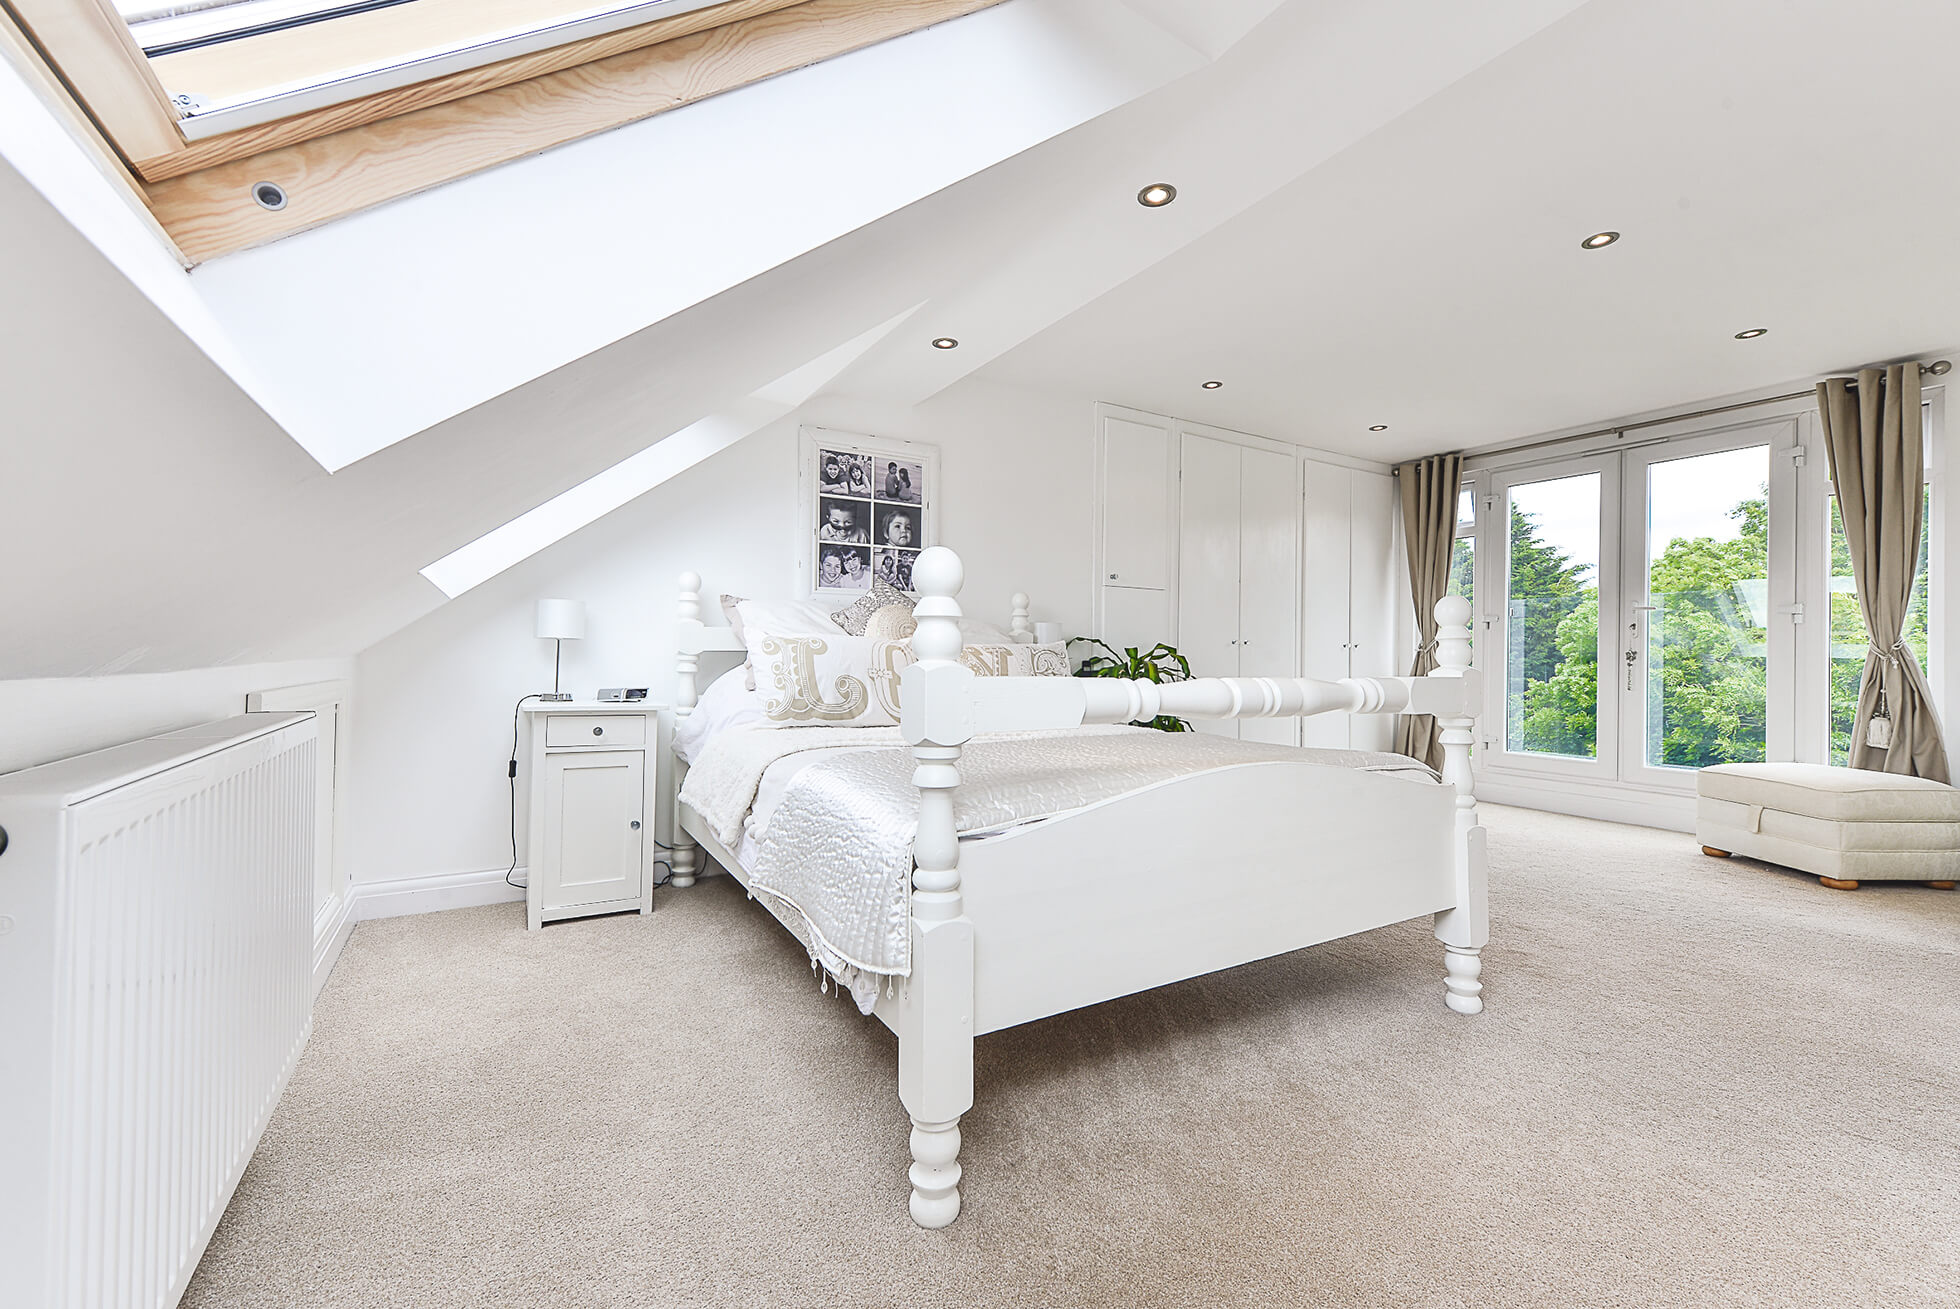 Do you have a question about converting your Loft in Hoddesdon? Here are the most popular questions asked by our clients.